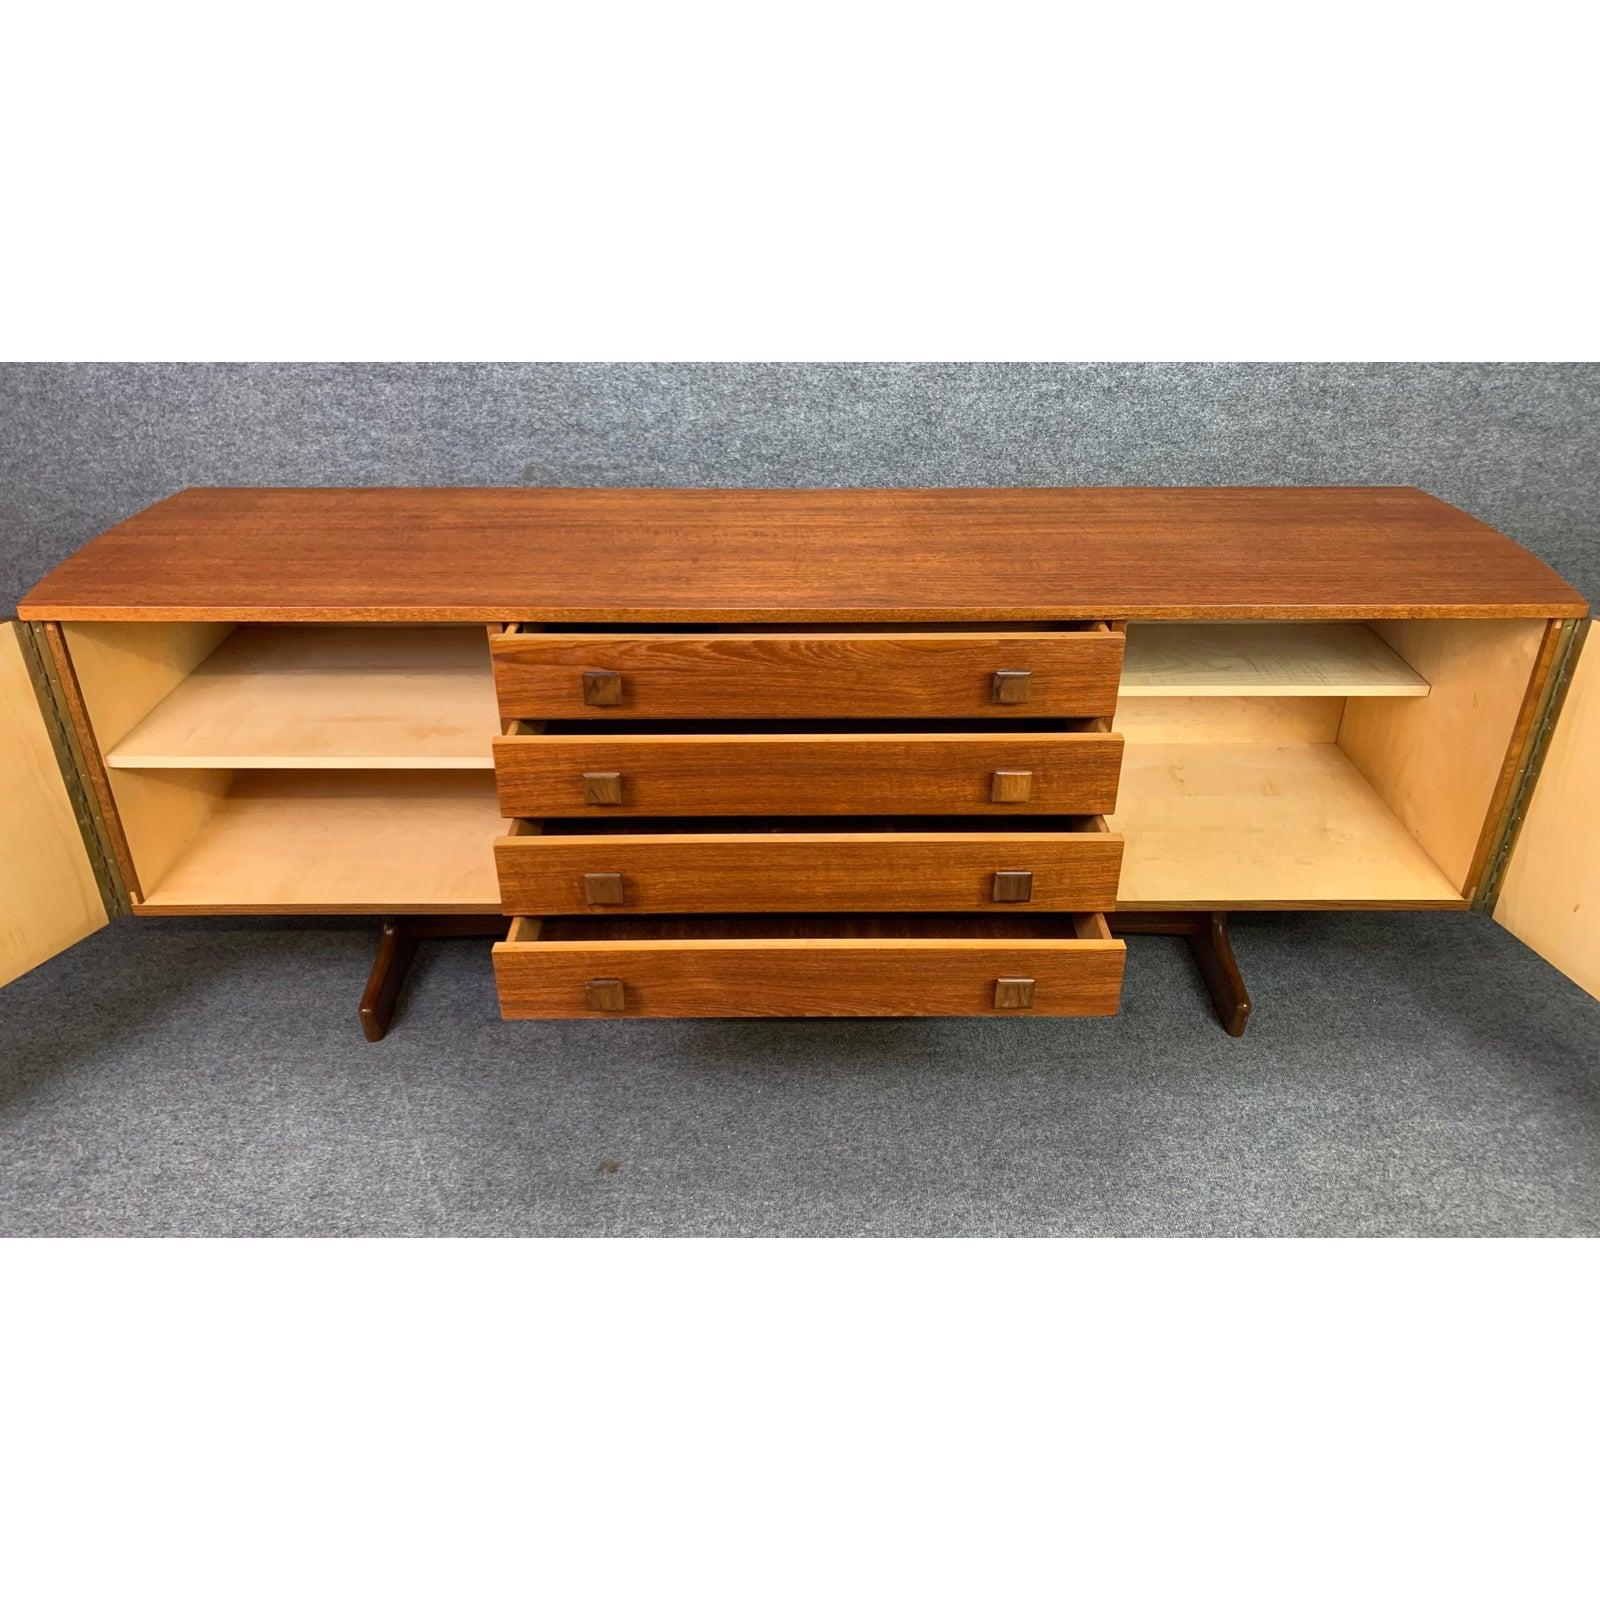 Here is a spectacular 1960s sideboard designed by Peter Hayward, manufactured in England by Vanson.
This special credenza, recently imported from UK to California before its restoration, features a teak top , curved sides and drawers showing